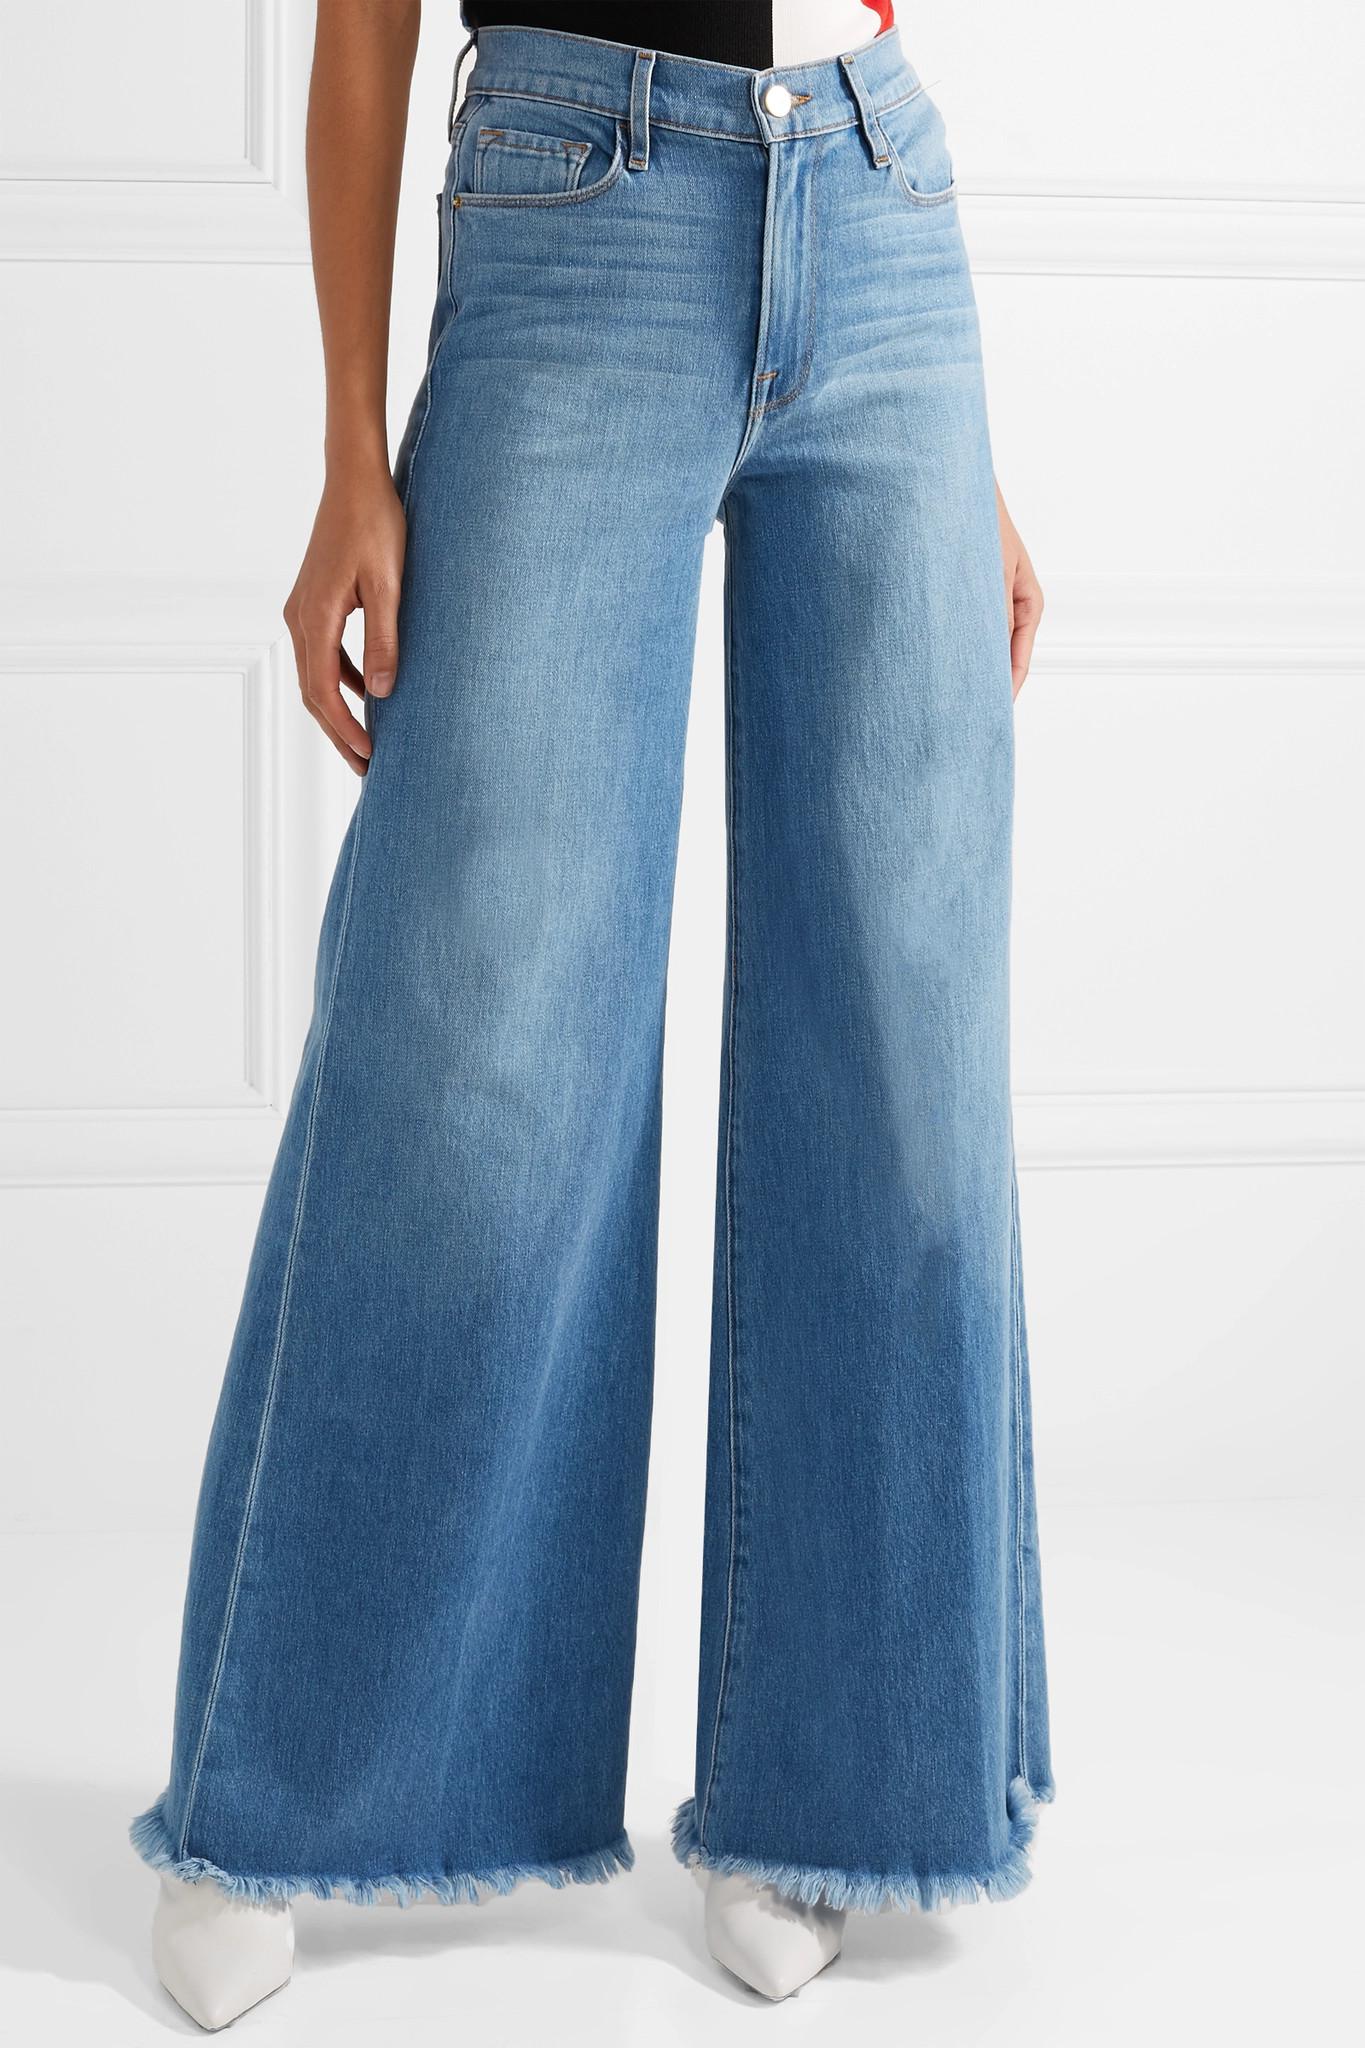 Lyst - Frame Frayed Faded High-rise Wide-leg Jeans in Blue